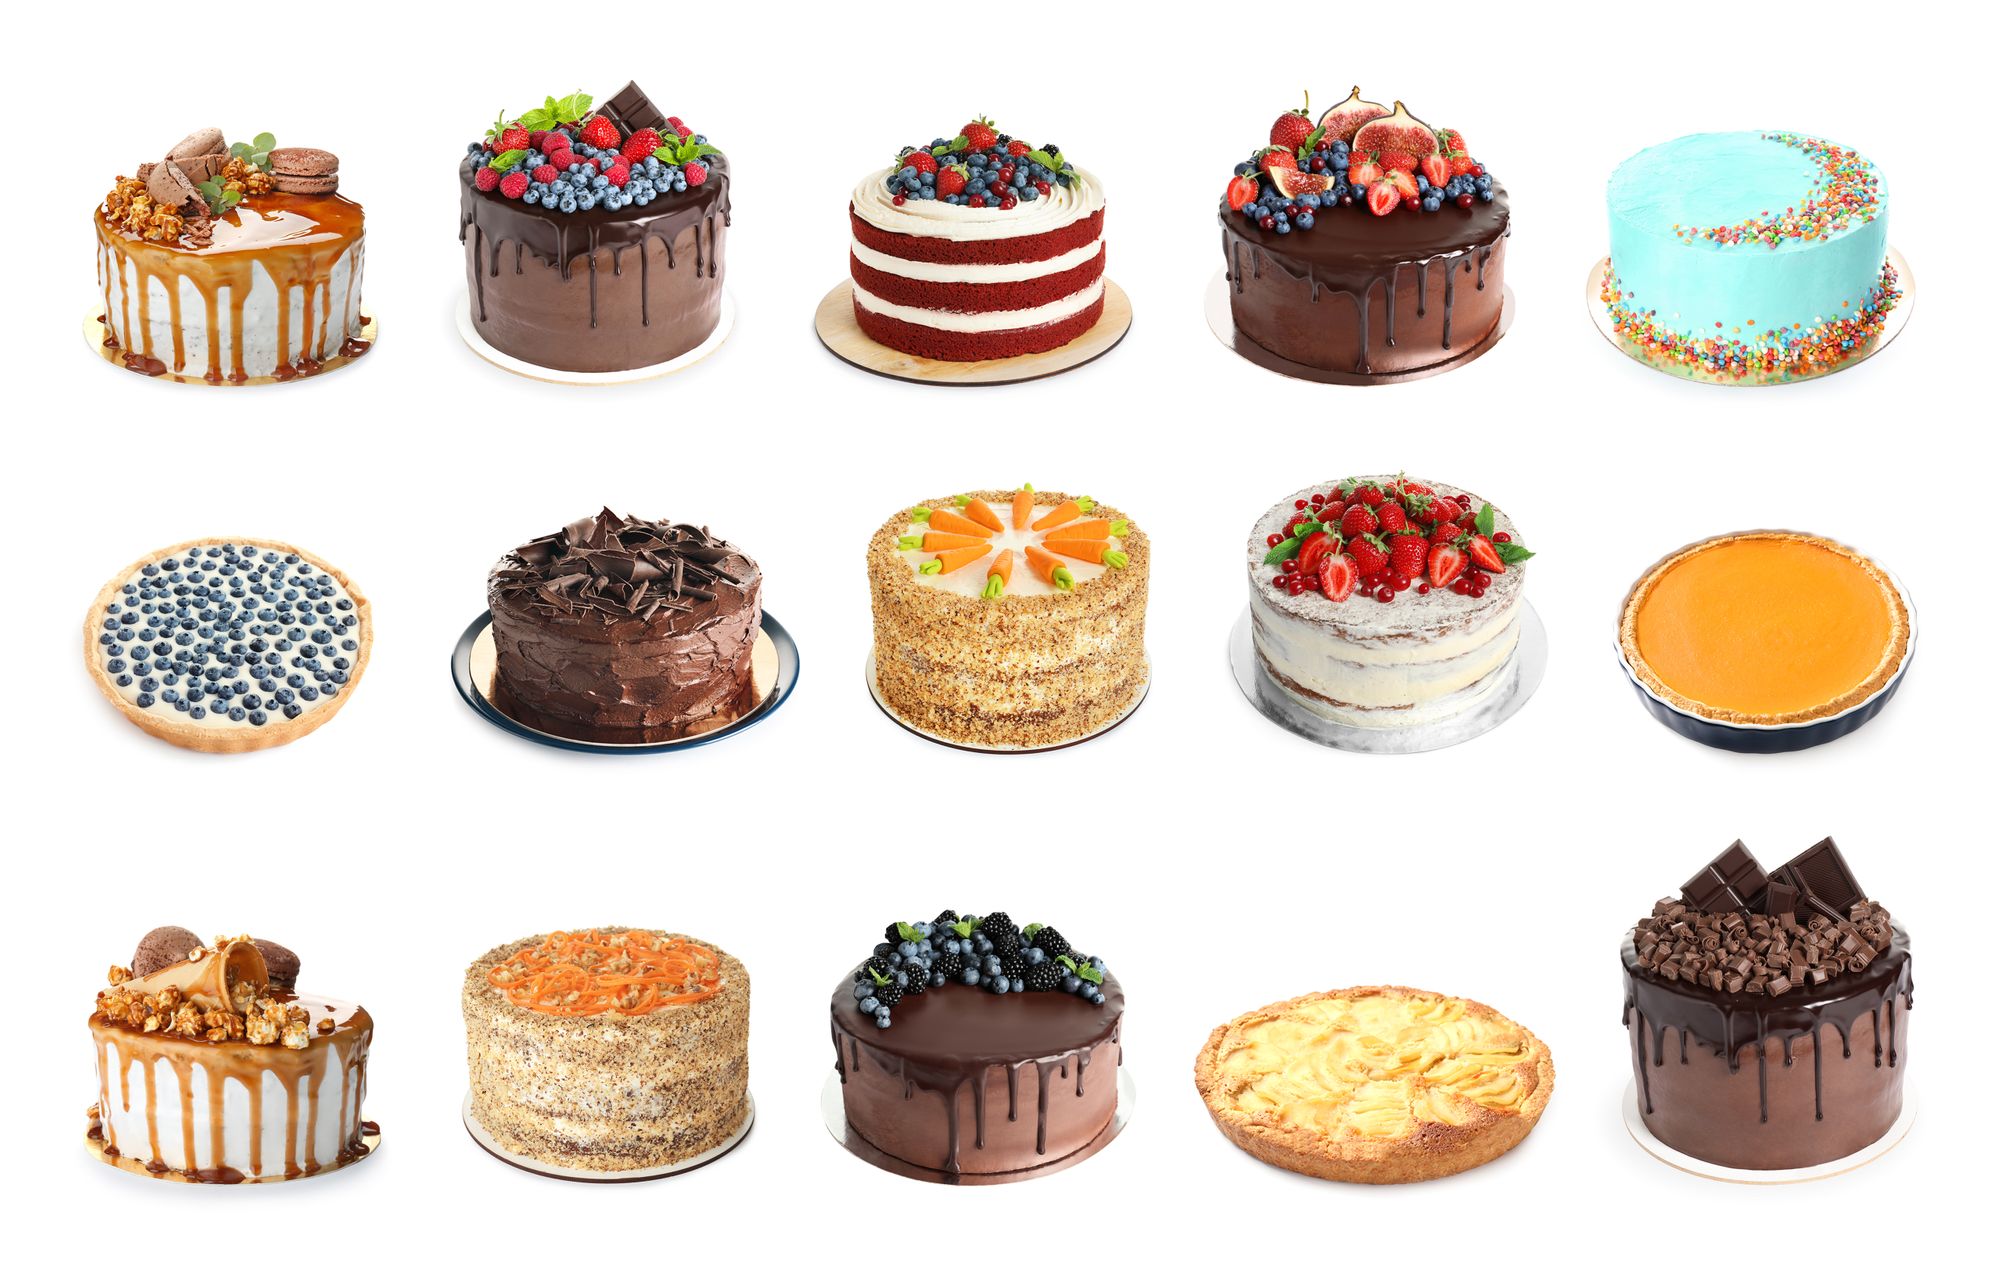 12 Places to Consider for the Best Cake Shop in Singapore